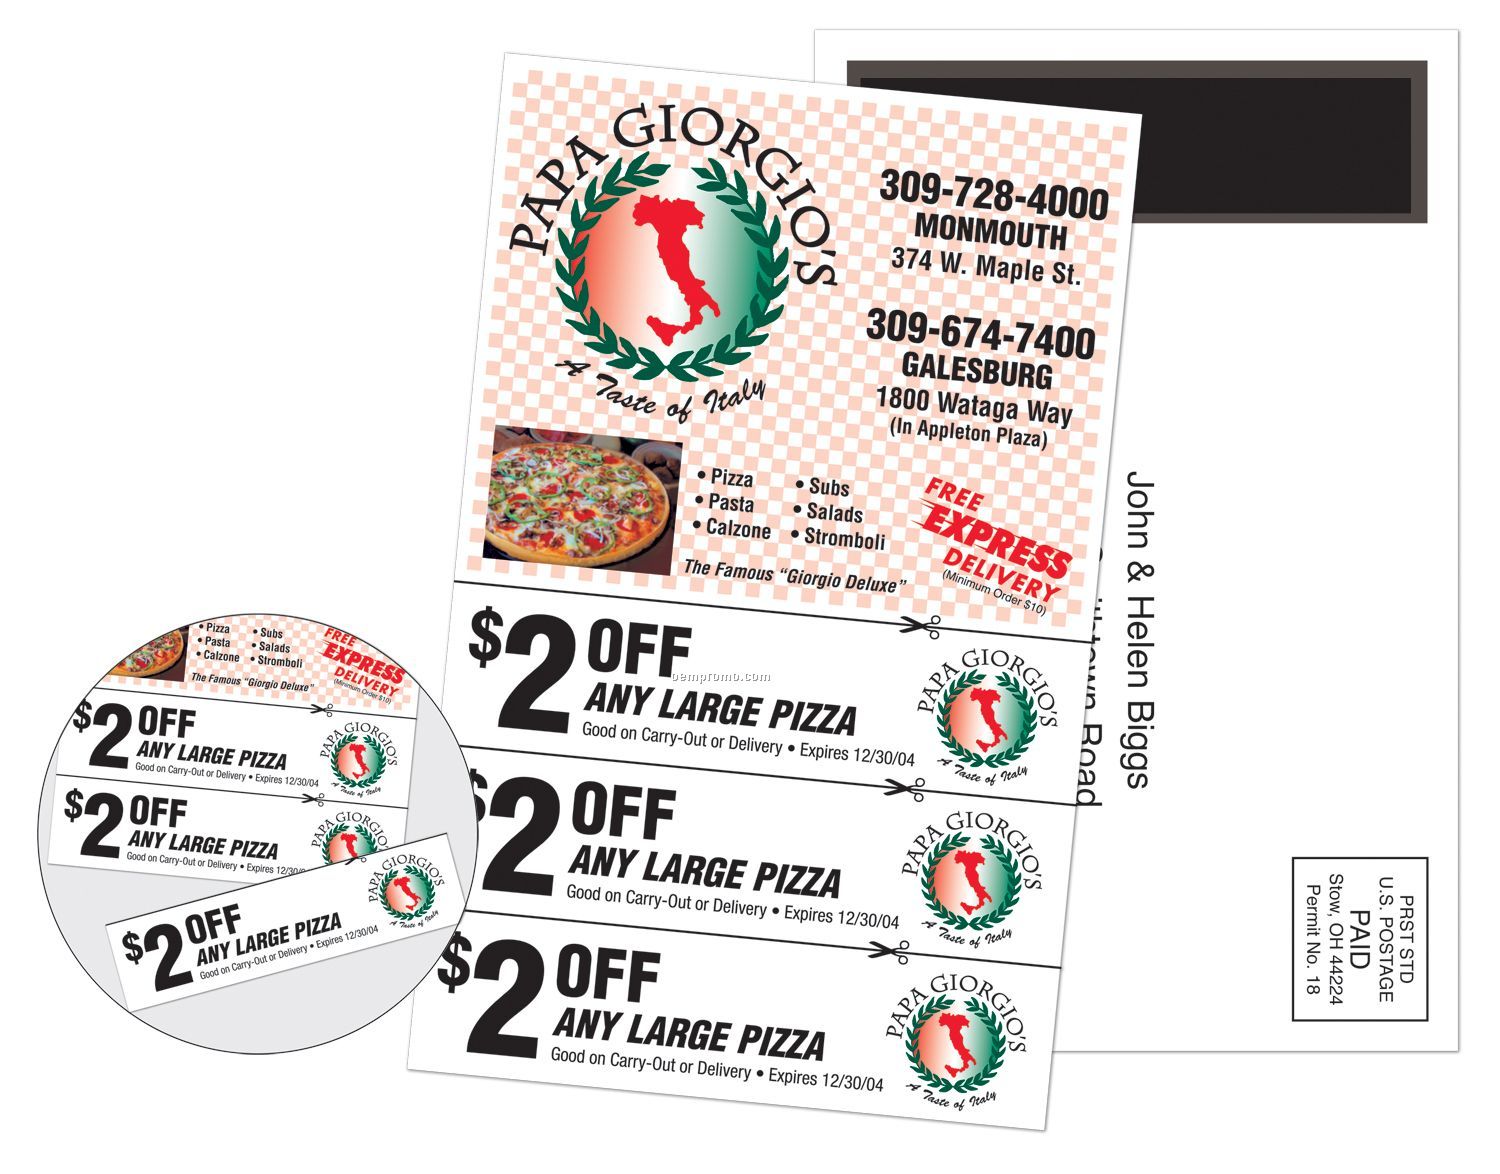 Stick-up Mailer Coupon Magnets